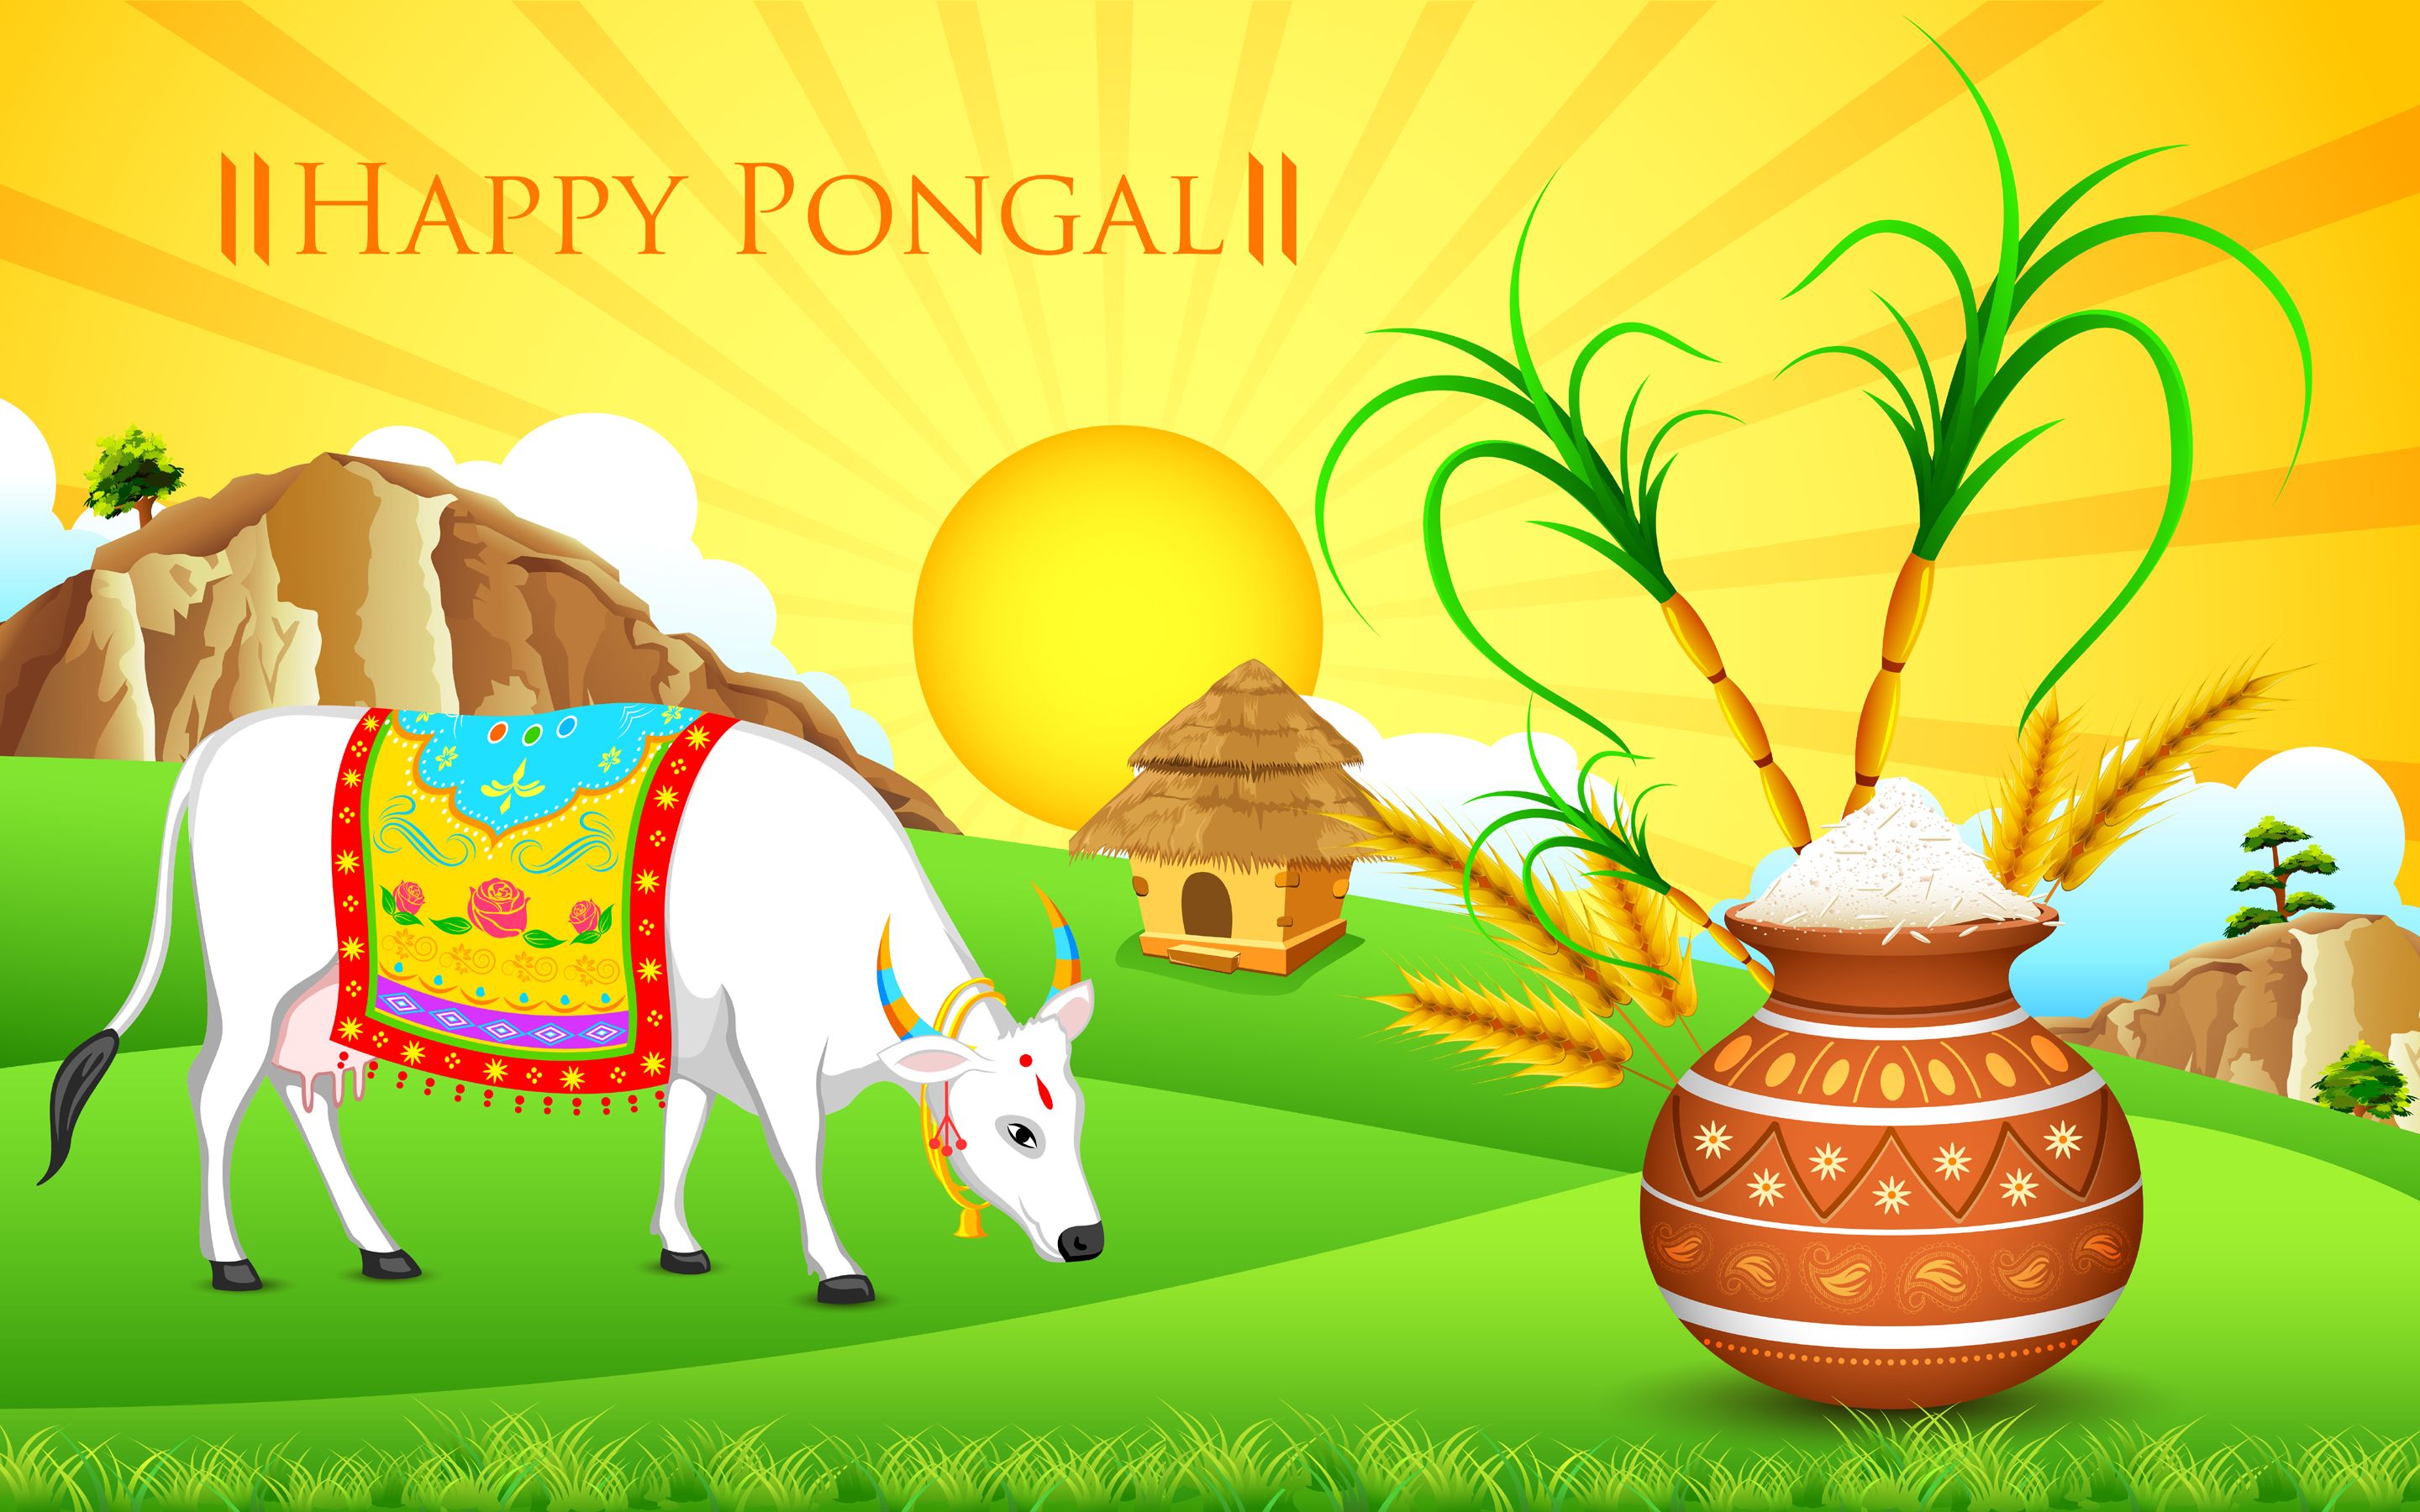 Happy Pongal Festival Wishes Lovely Desktop Wallpaper - Happy Pongal Images Download , HD Wallpaper & Backgrounds